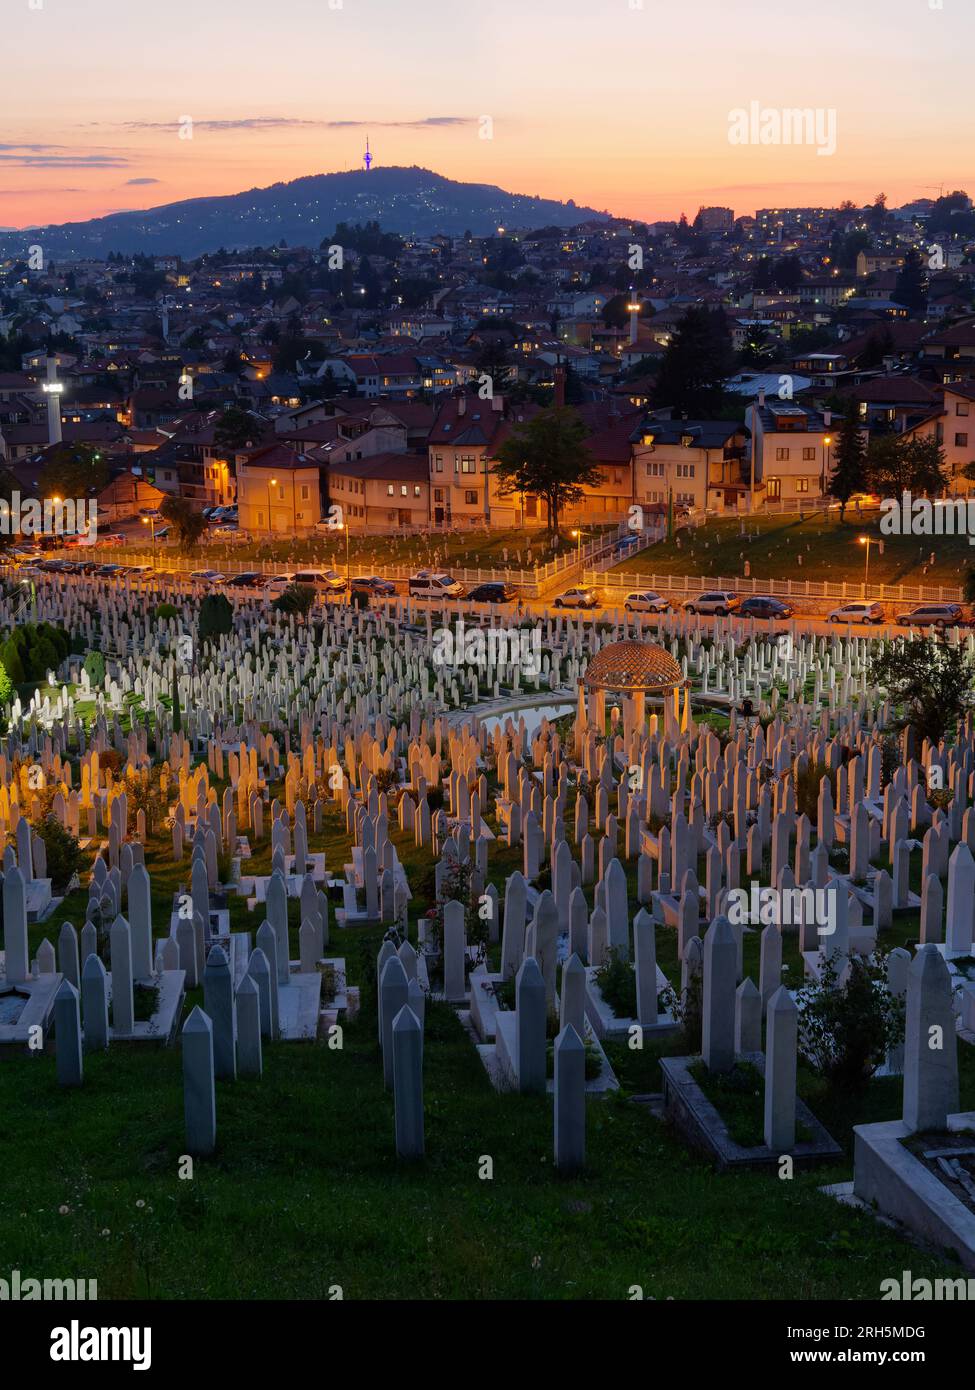 Cemetery at night with houses on the hill behind in the city of Sarajevo, Bosnia and Herzegovina, August 13, 2023. Stock Photo